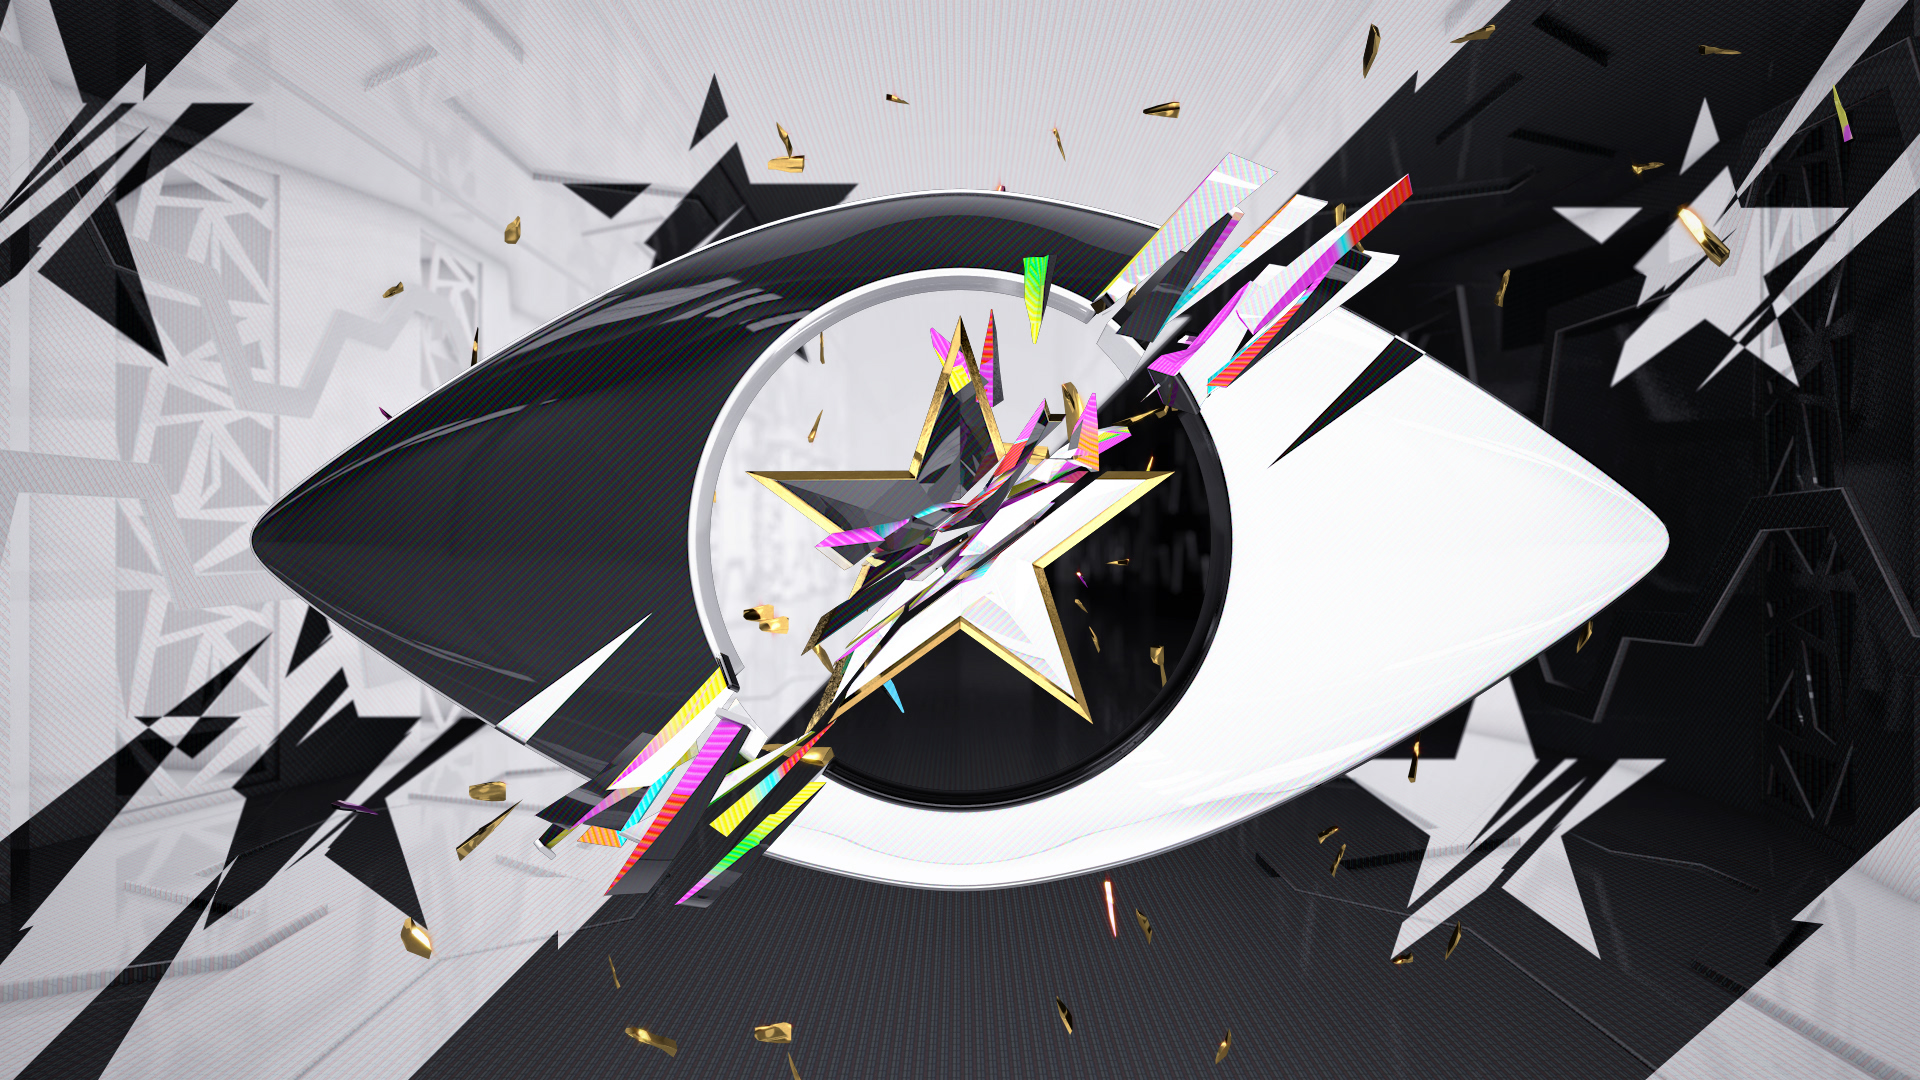 Day 14: Celebrity Big Brother final confirmed for August 26th